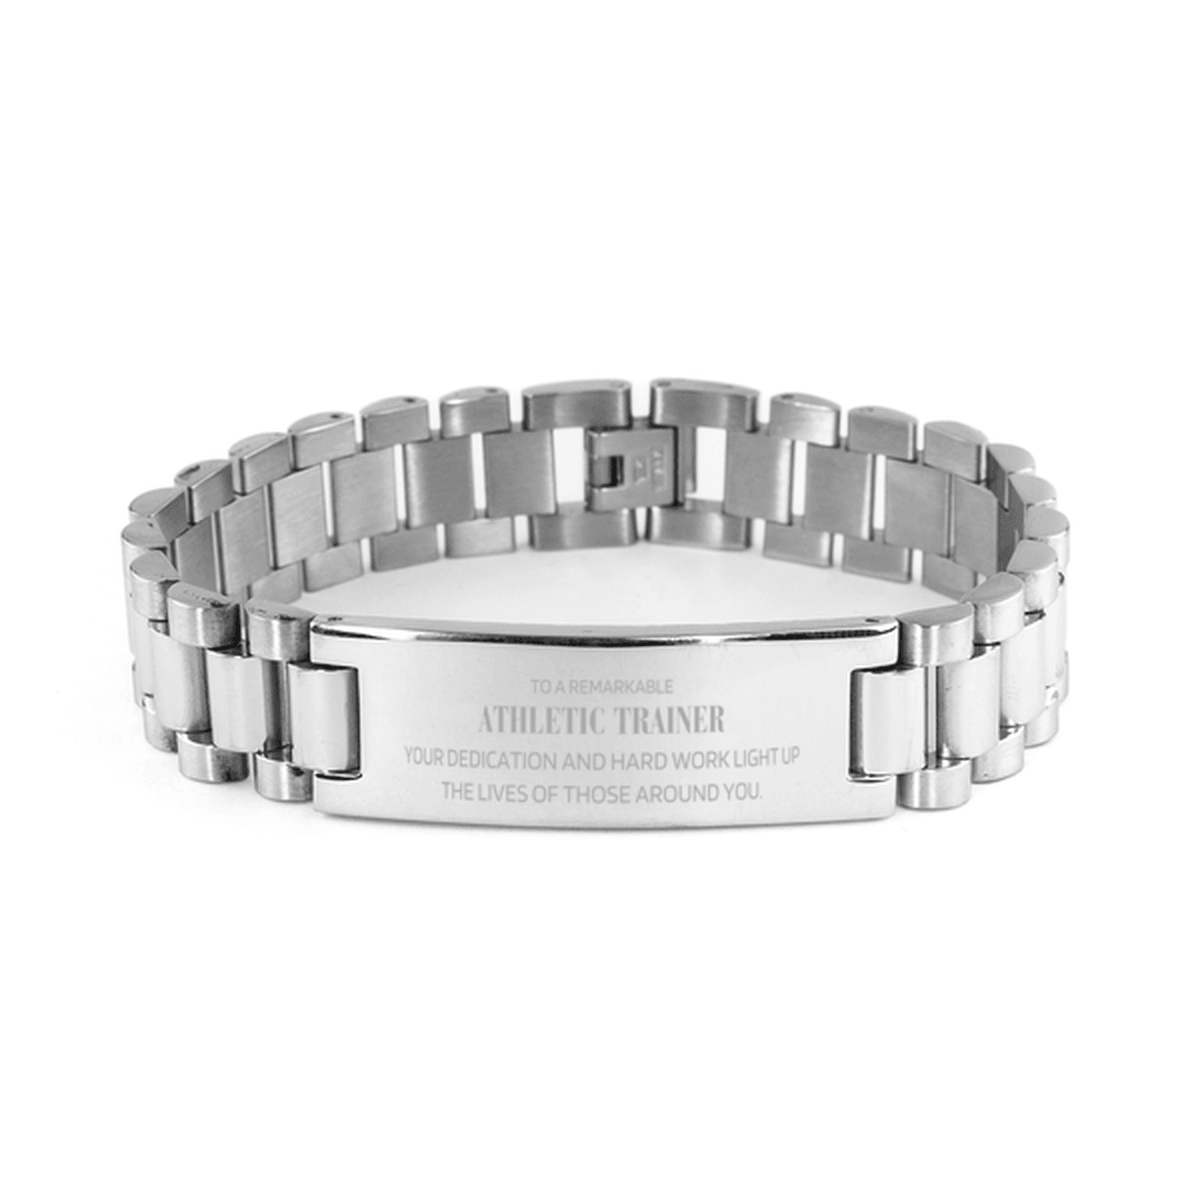 Remarkable Athletic Trainer Gifts, Your dedication and hard work, Inspirational Birthday Christmas Unique Ladder Stainless Steel Bracelet For Athletic Trainer, Coworkers, Men, Women, Friends - Mallard Moon Gift Shop